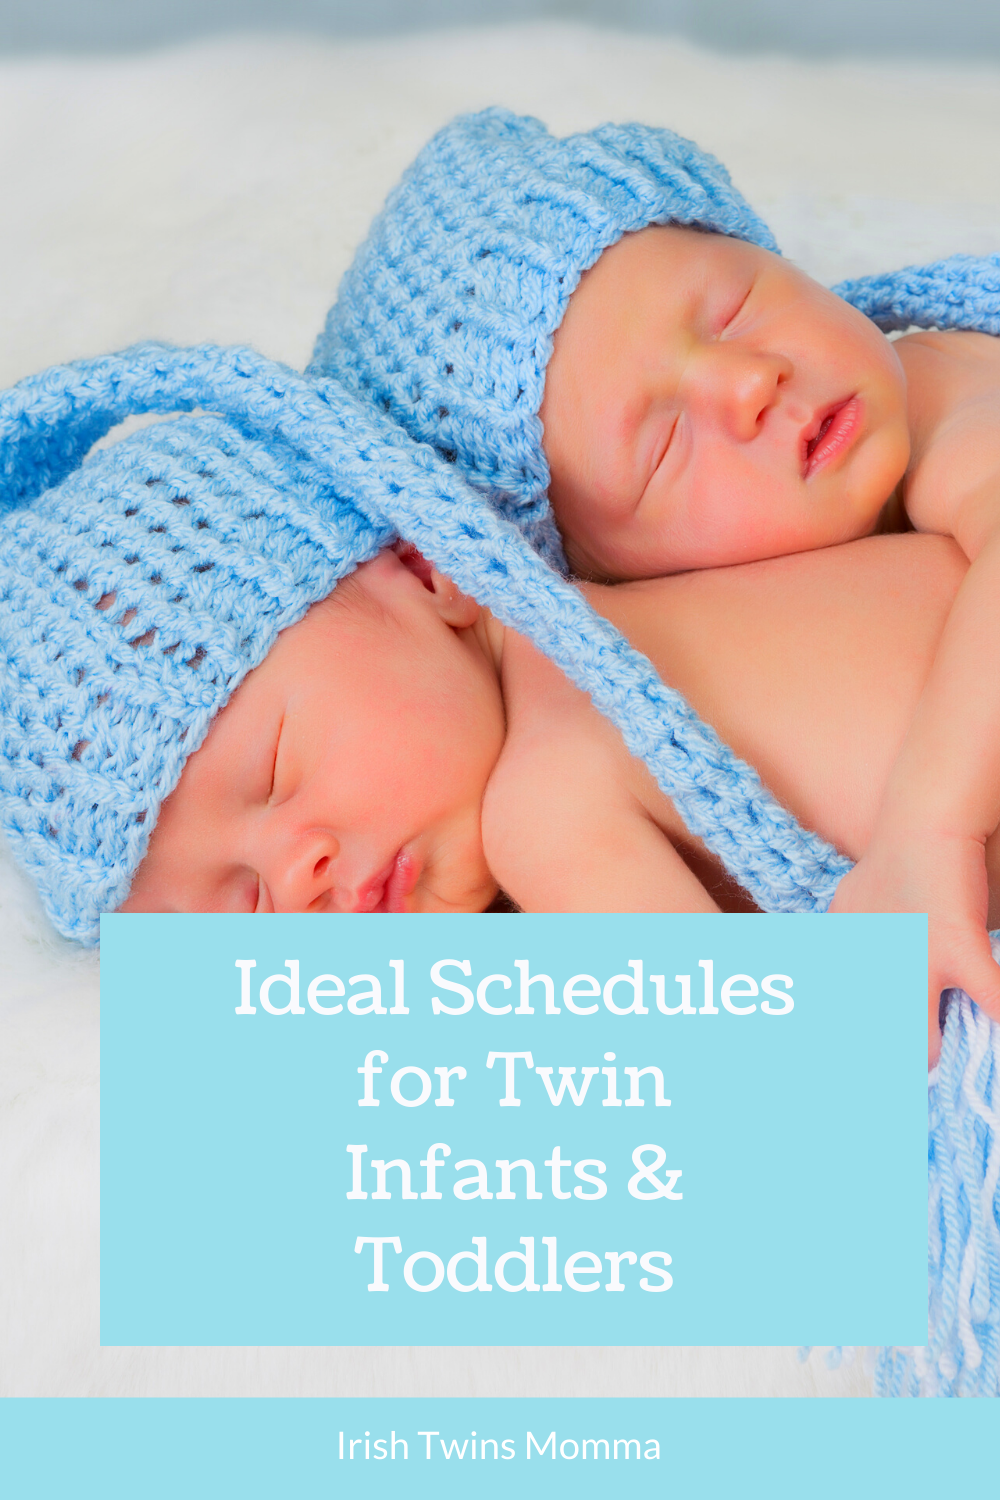 Ideal Schedules for Twin Infants & Toddlers